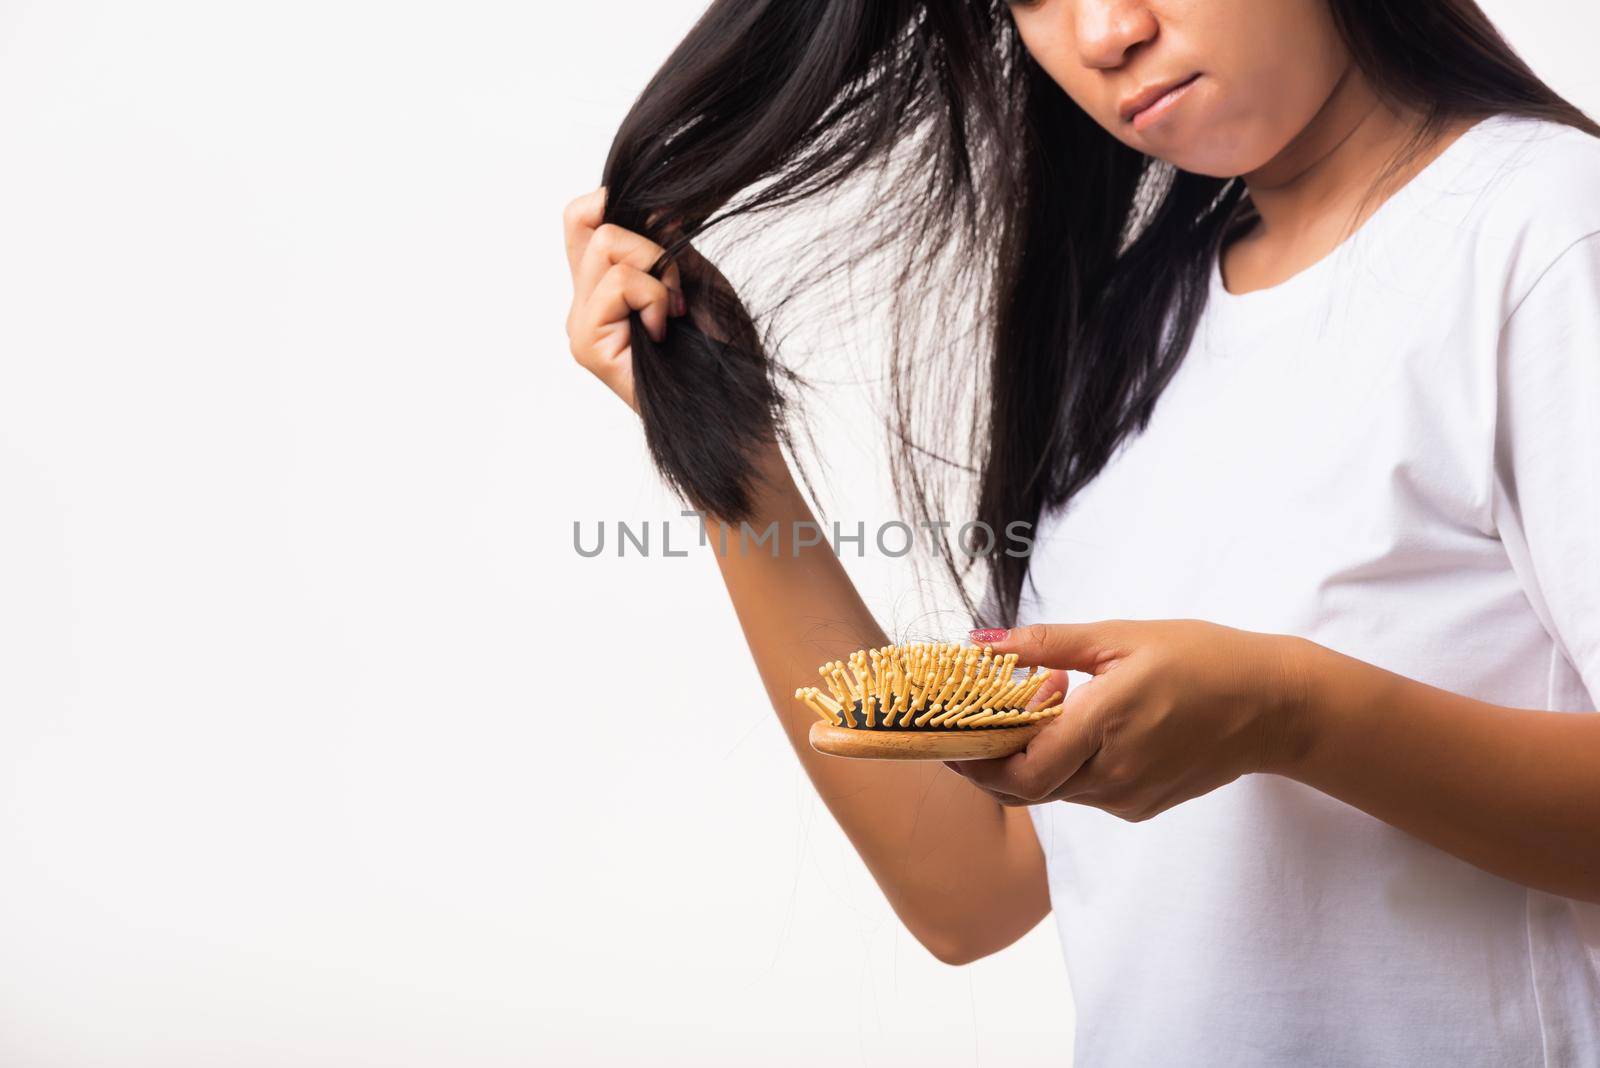 Woman weak hair her hold hairbrush with damaged long loss hair in comb brush on hand by Sorapop